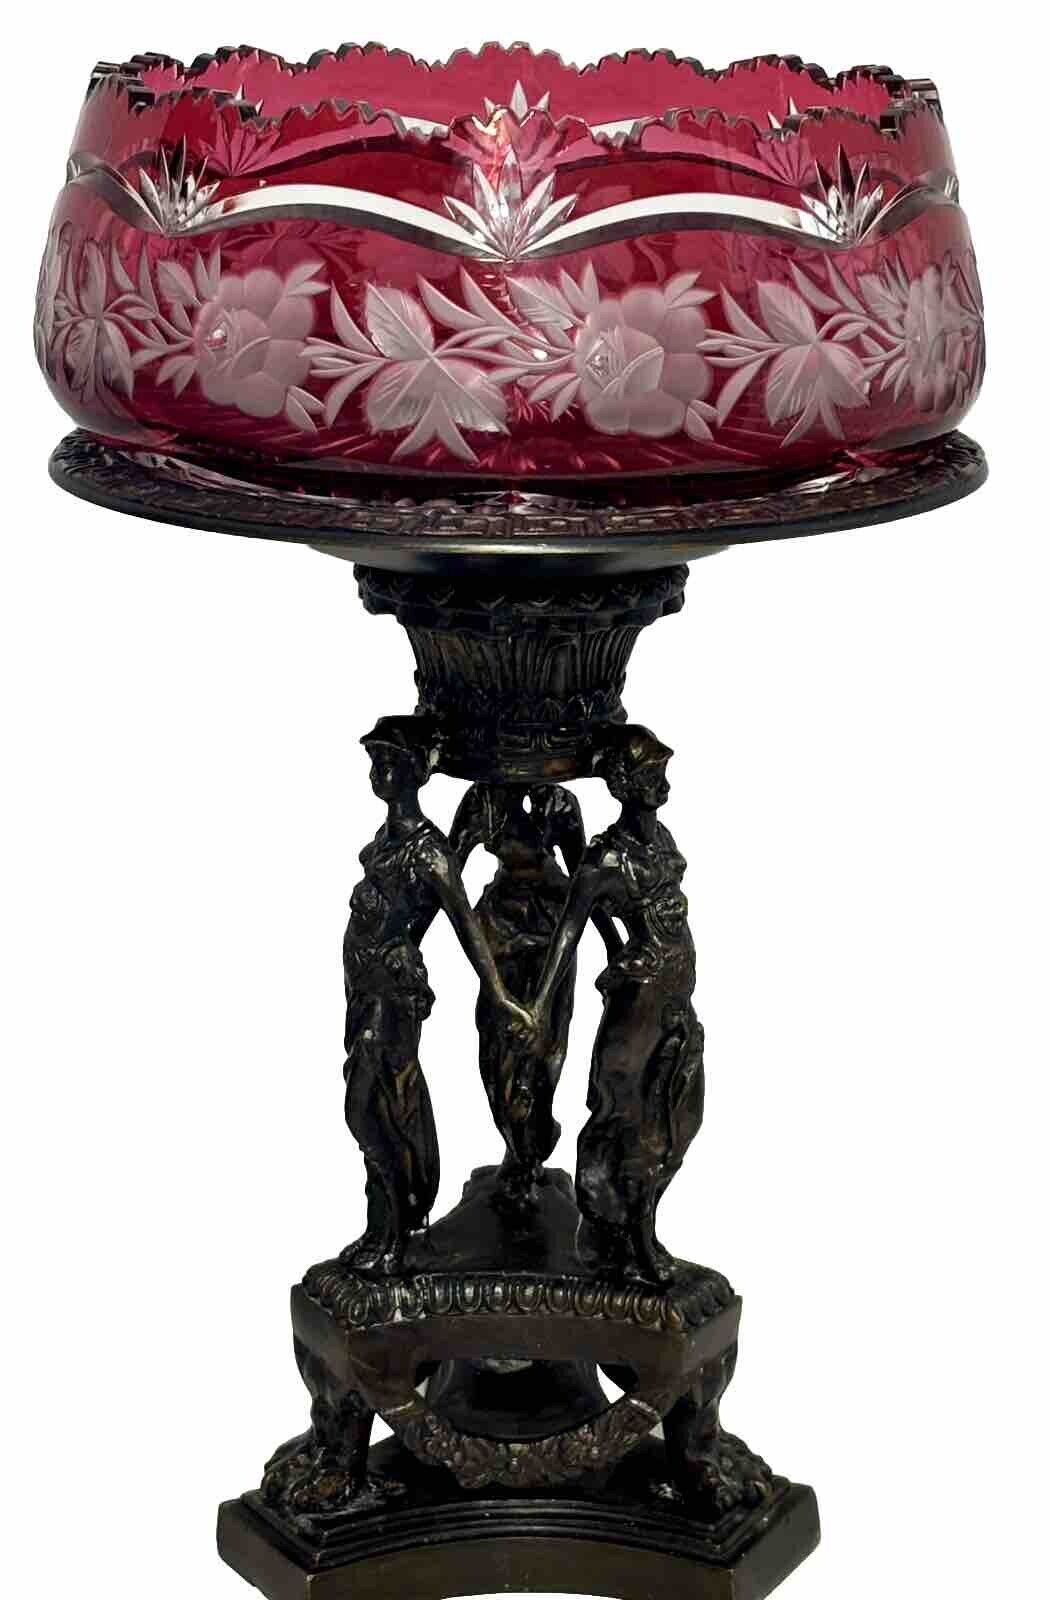 Antique Victorian Cranberry Glass Bridal’s Basket On Intricate Bronze Stand 19”H